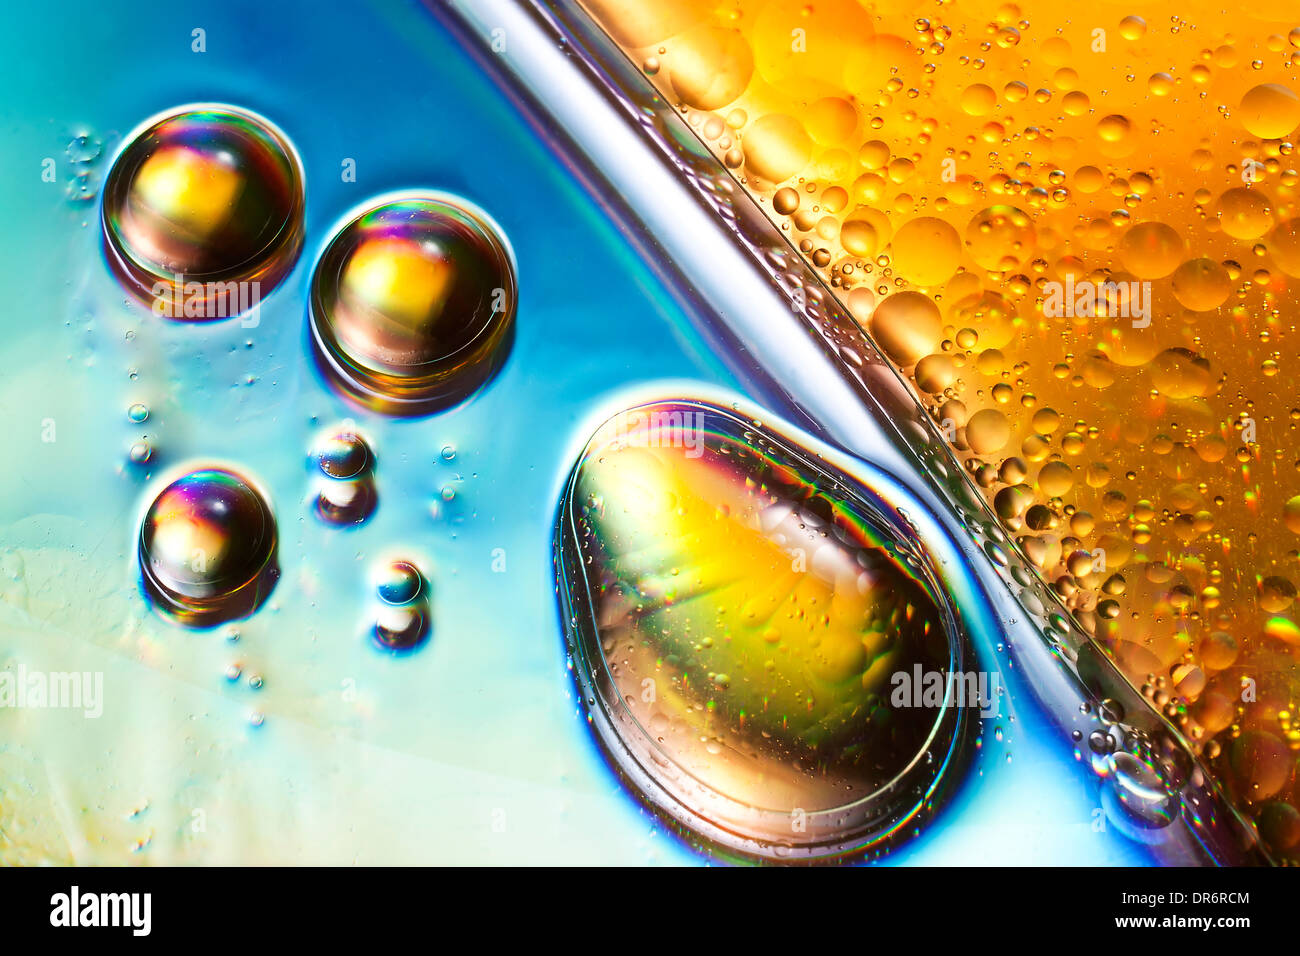 Oil and water bubble colorful and shining abstract Stock Photo